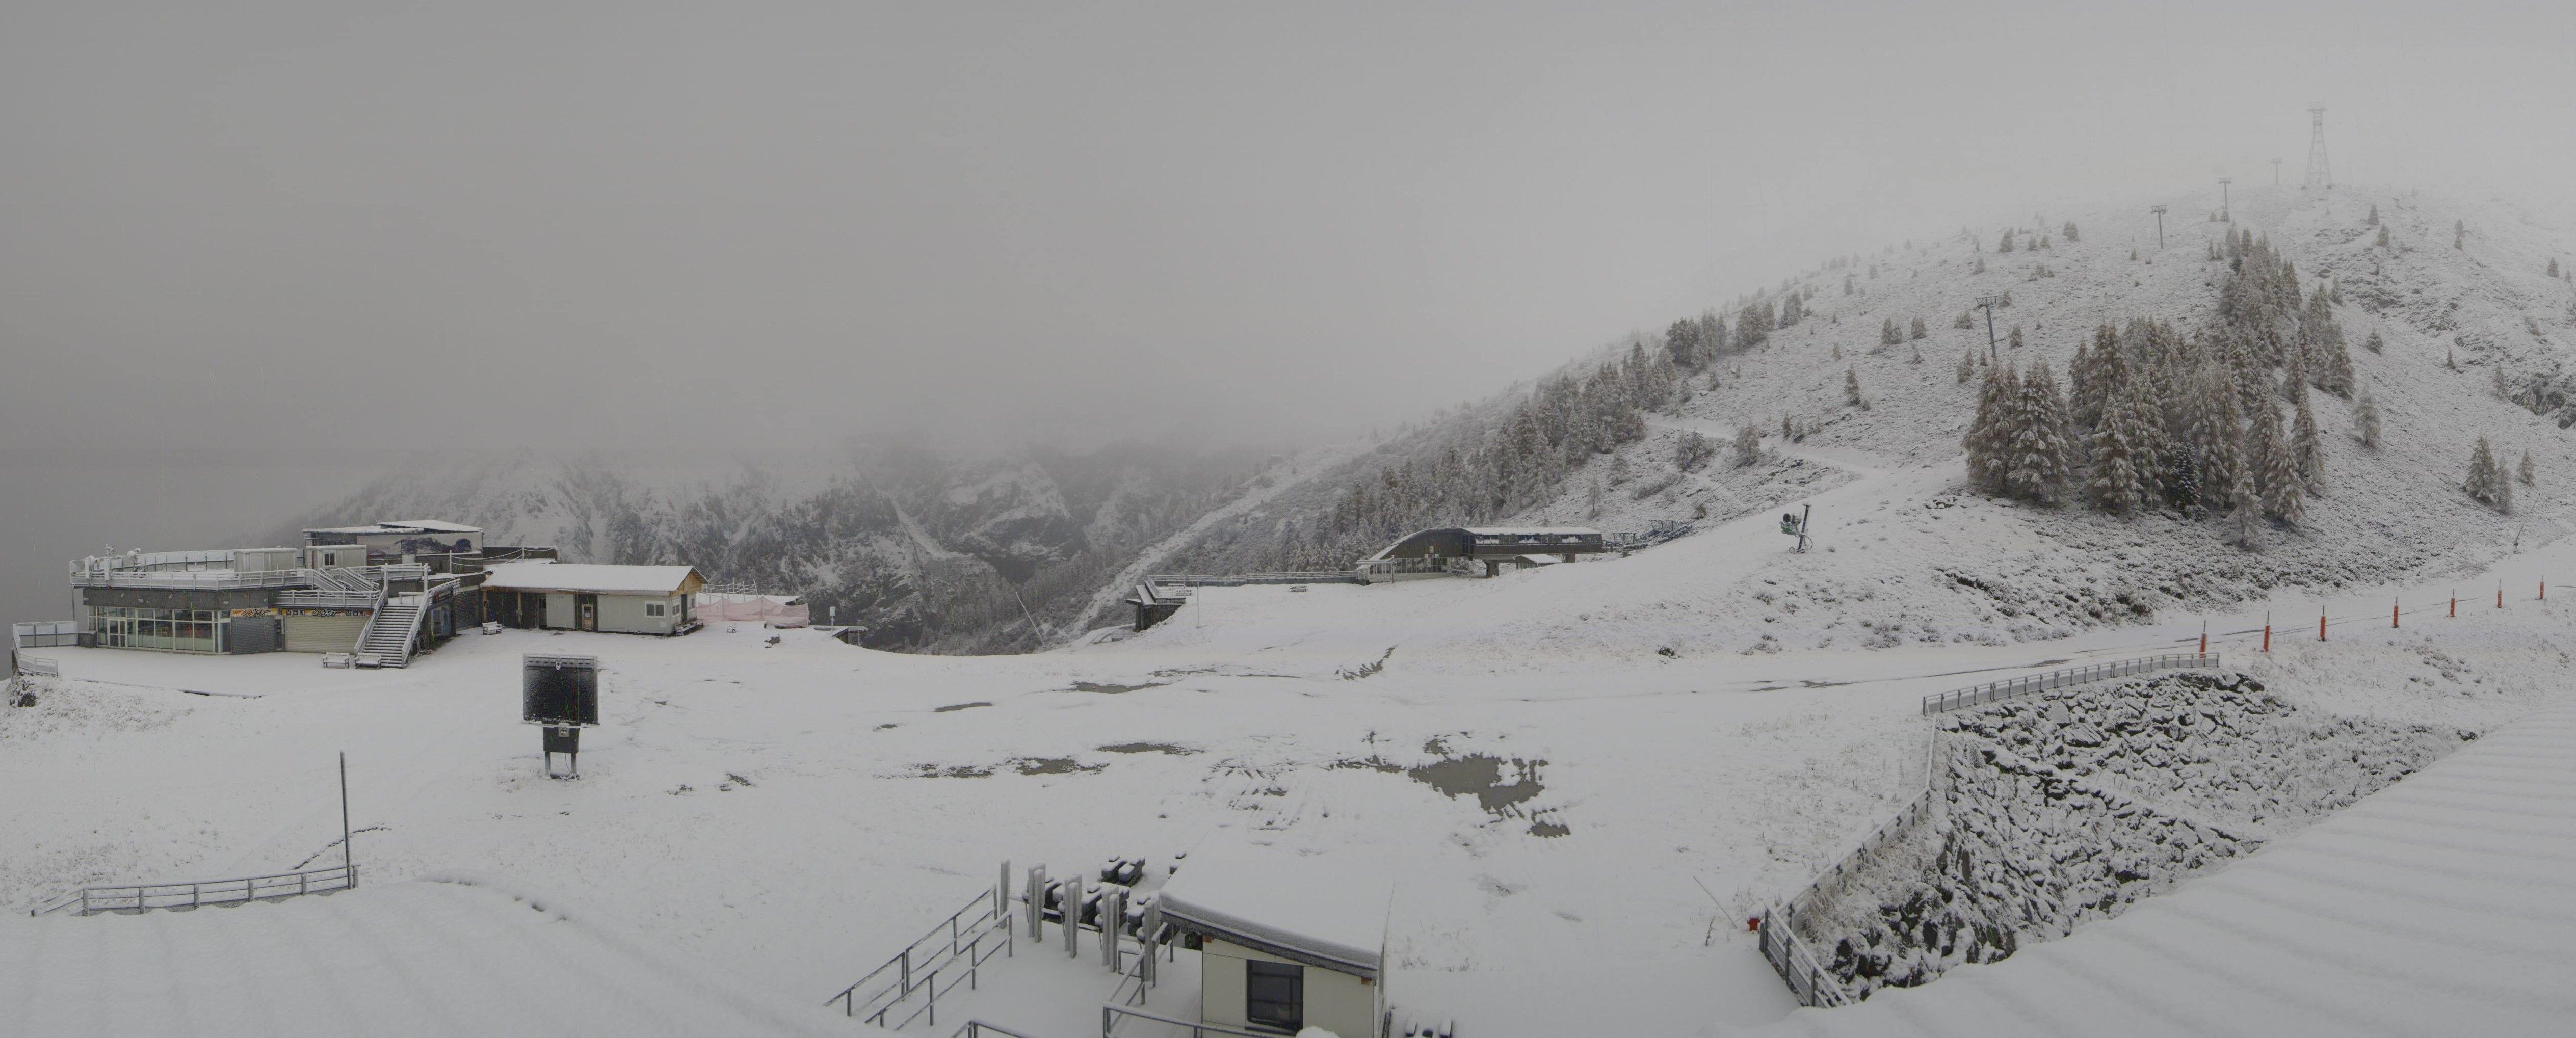 In Chamonix it's already white at 2000 meters